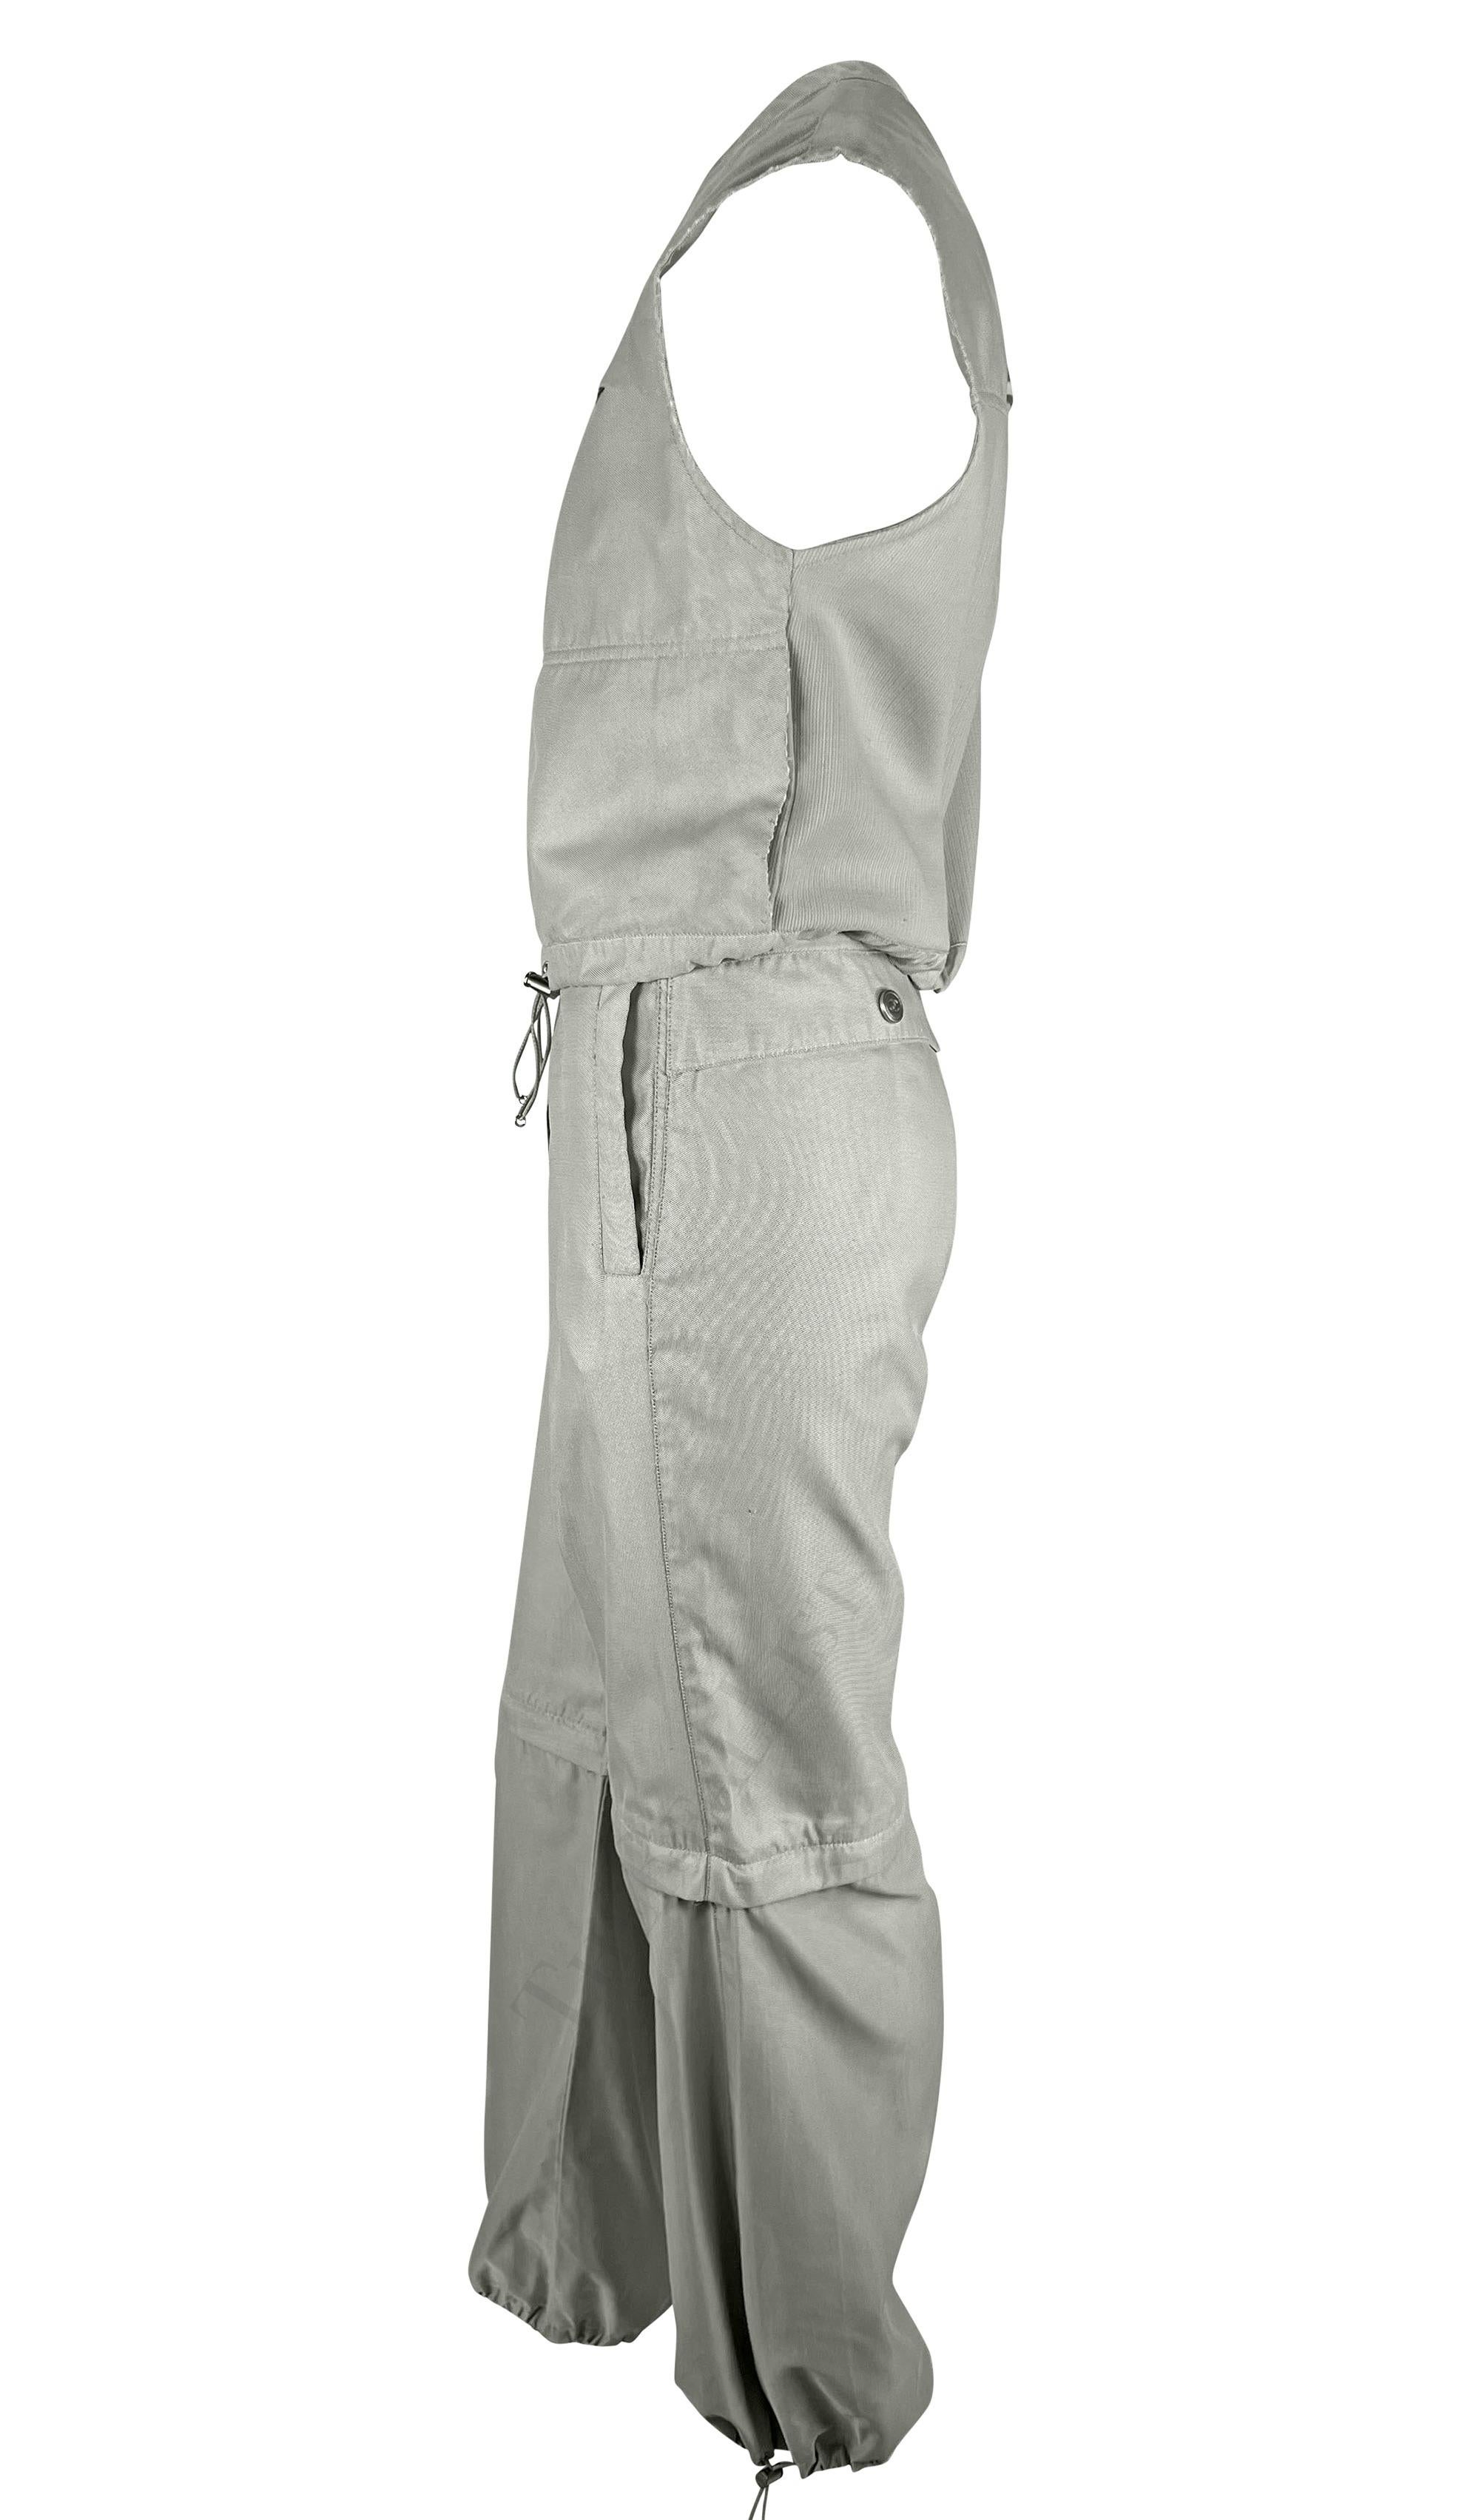 S/S 2001 Chanel by Karl Lagerfeld Identification Crop Top Cargo Pant Set For Sale 3